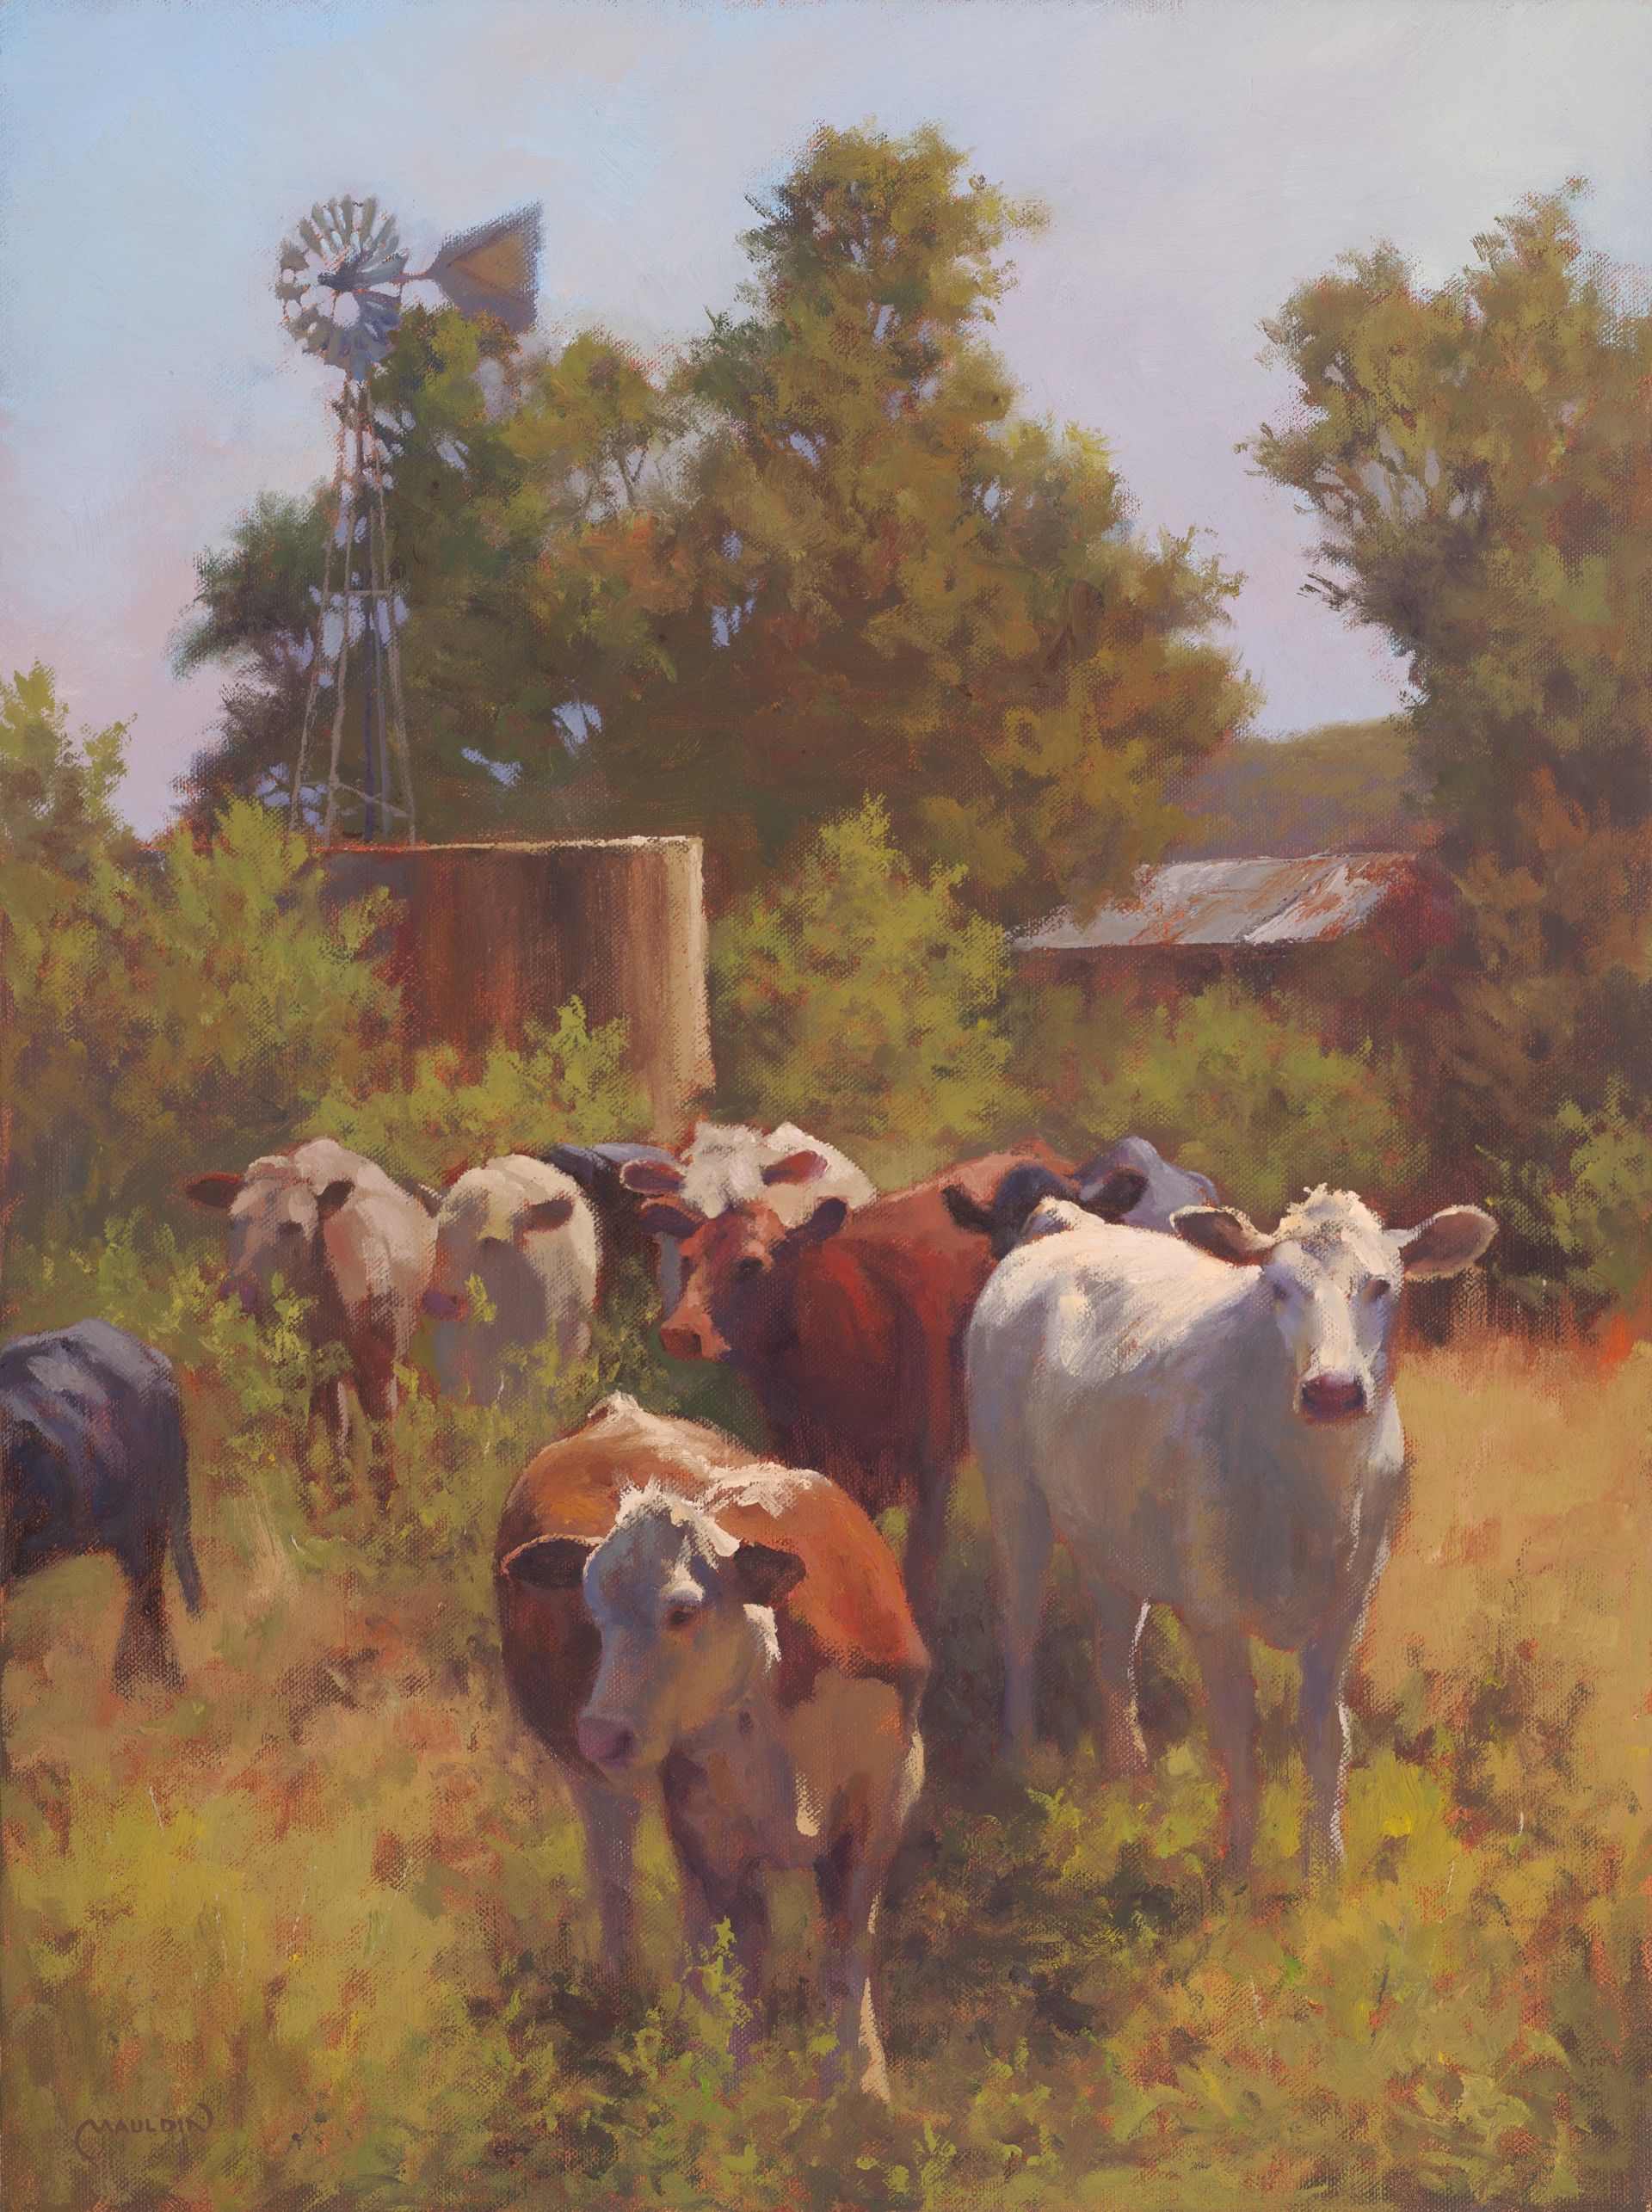 Hungry Herd by Chuck Mauldin